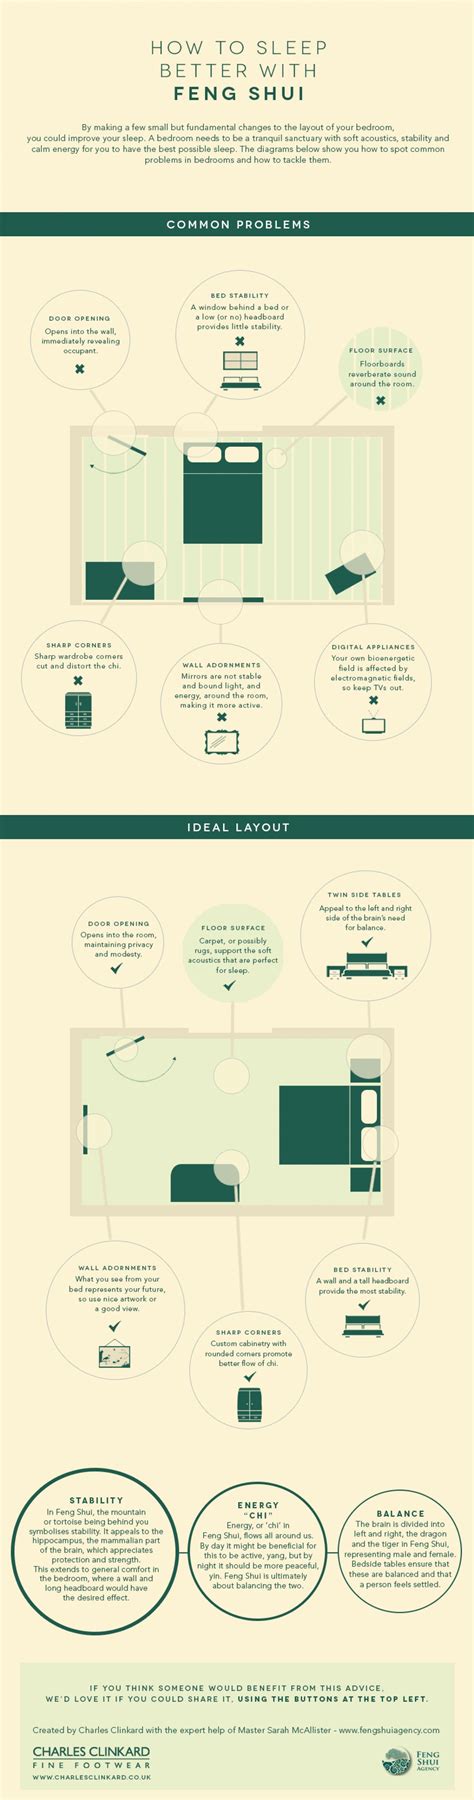 How To Sleep Better With Feng Shui Infographic Casa Feng Shui Feng Shui Bedroom Feng Shui